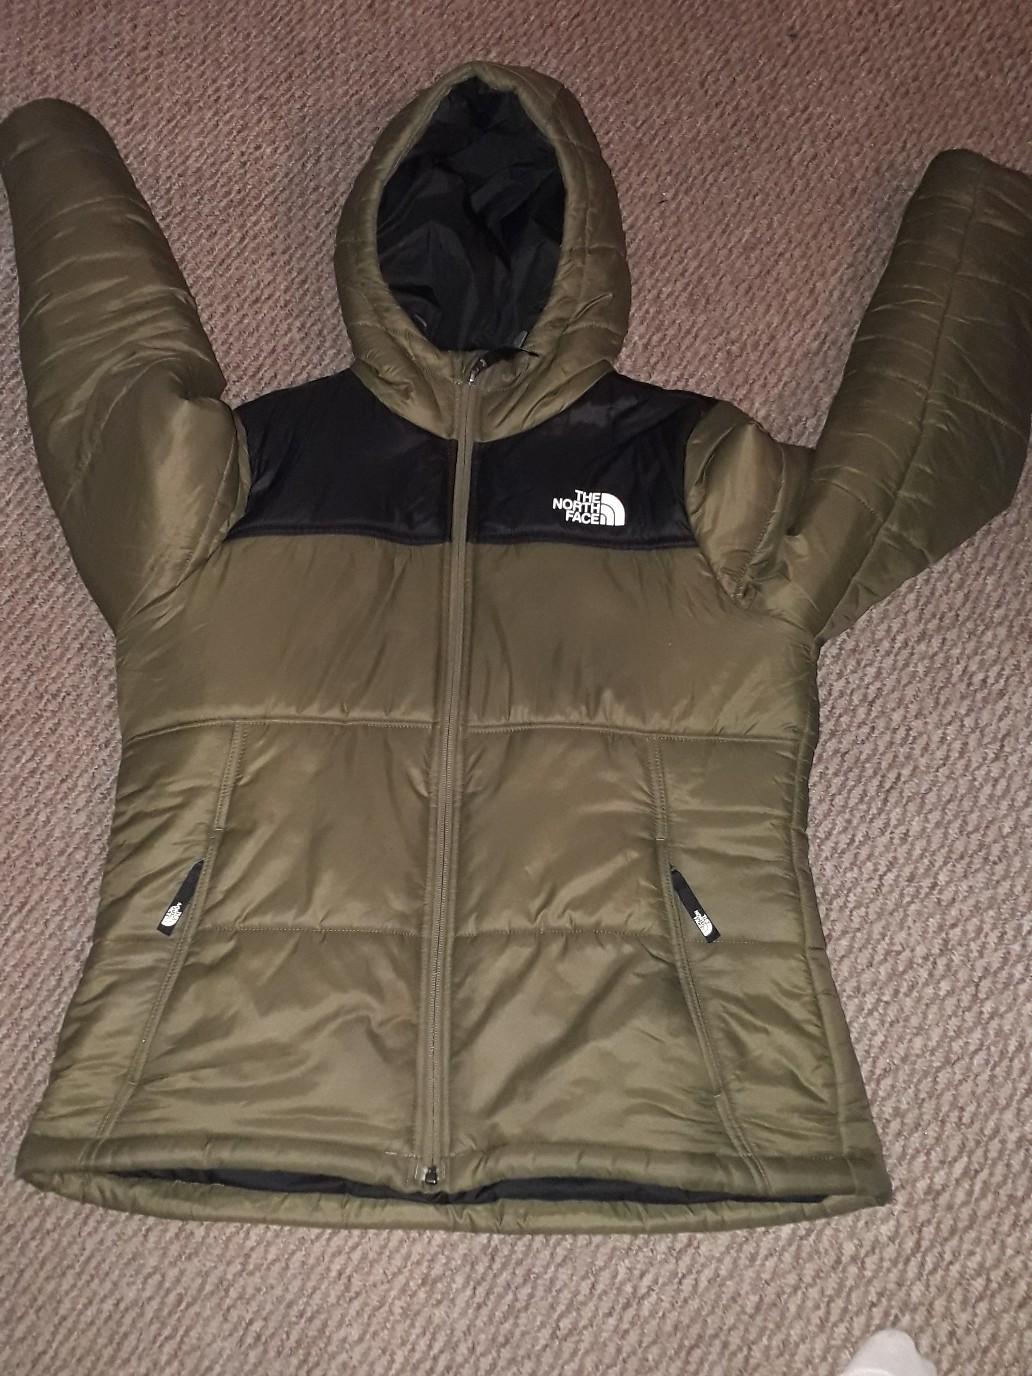 jd the north face womens